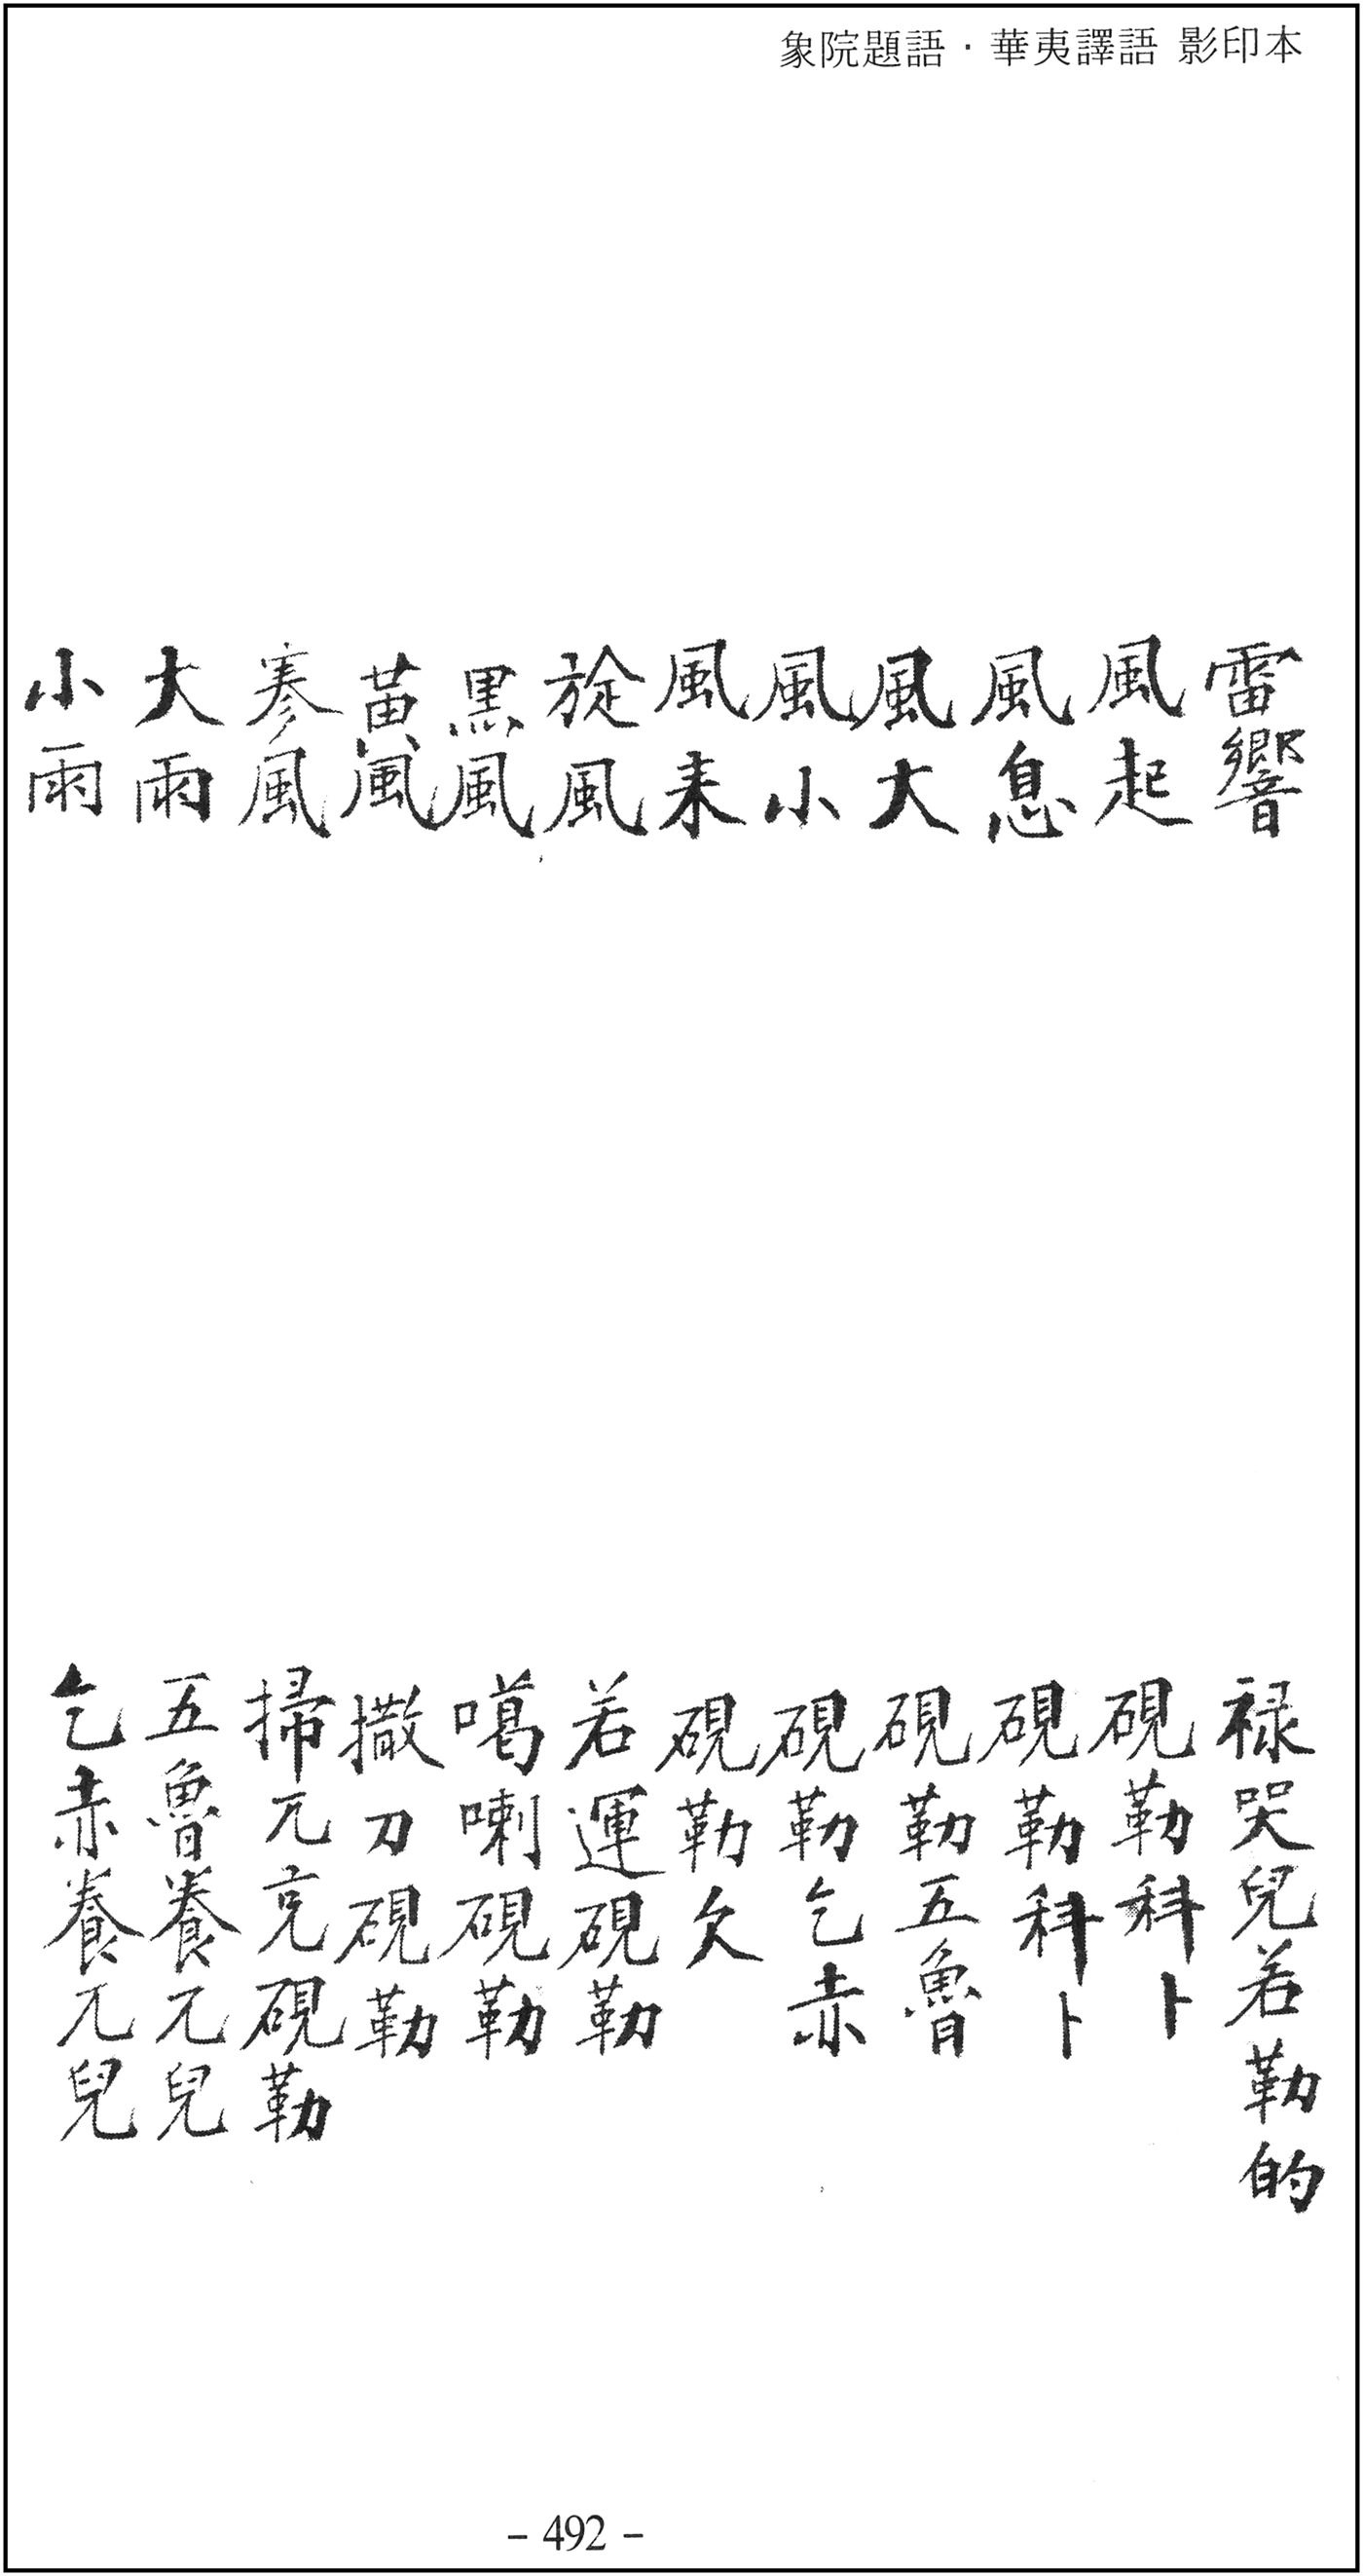 The Uighur Word Materials In A Manuscript Of Hua Yi Yi Yǔ 華夷譯語 In The Library Of Seoul National University V 天文門tianwenmen The Category Of Astronomy